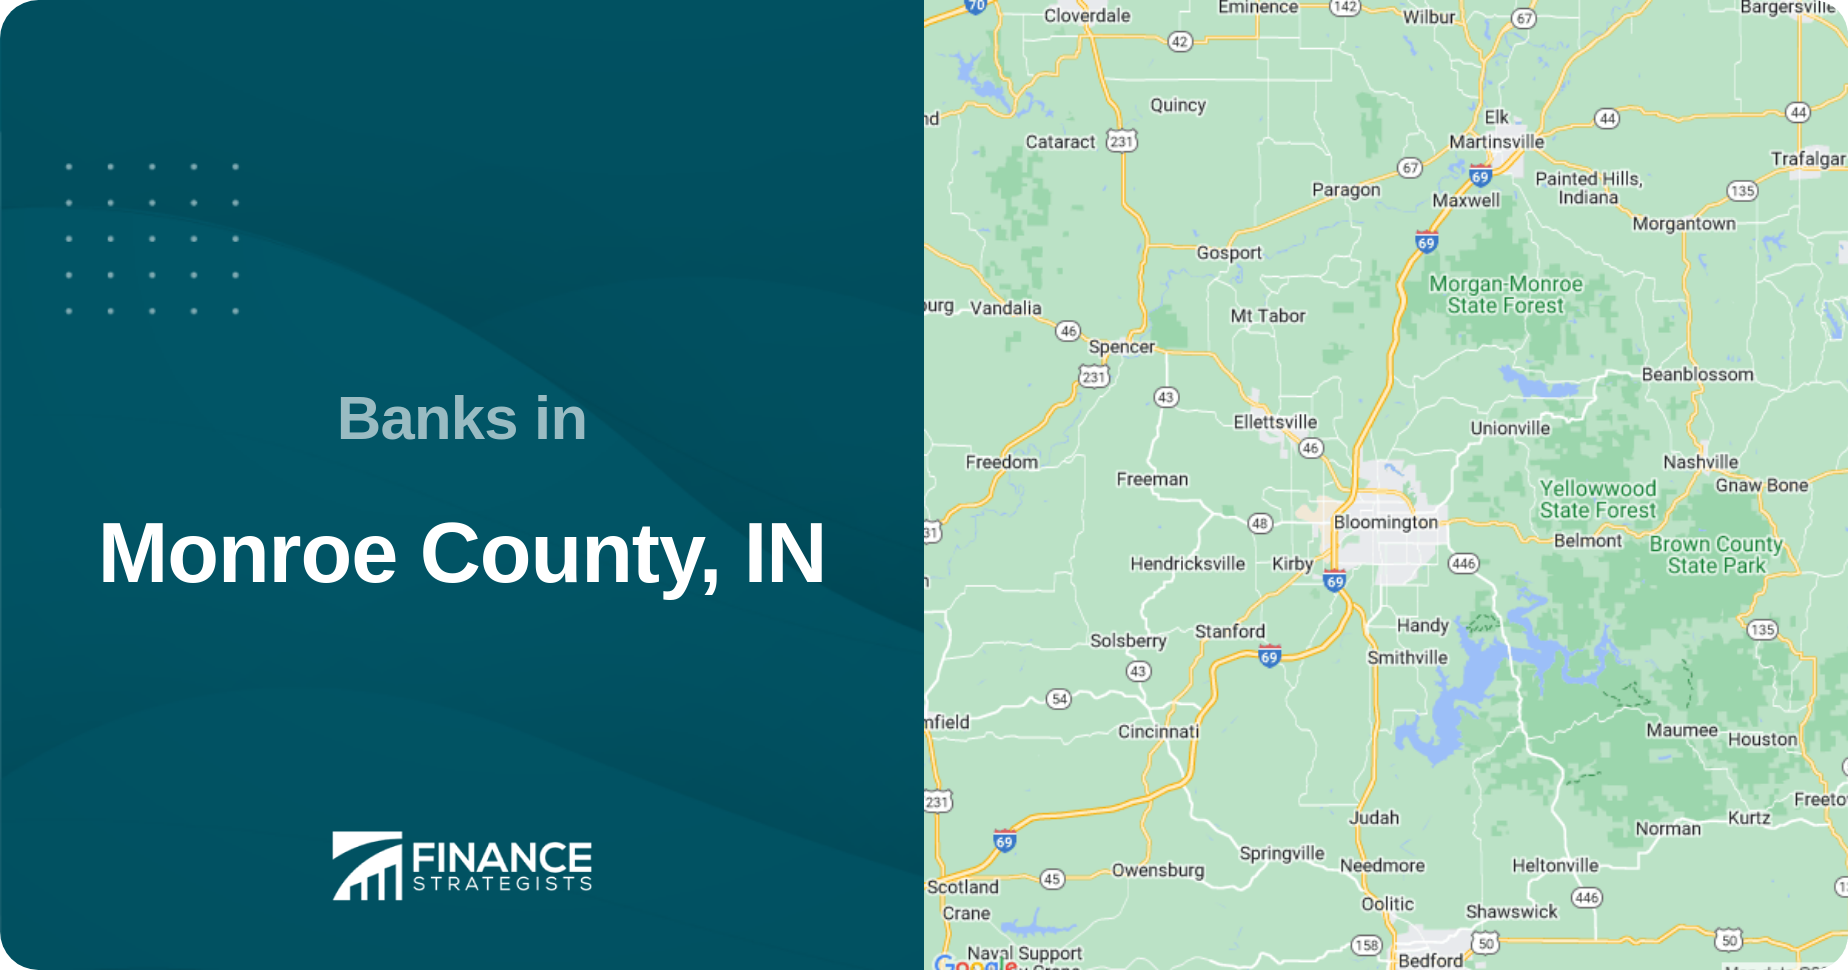 Banks in Monroe County, IN